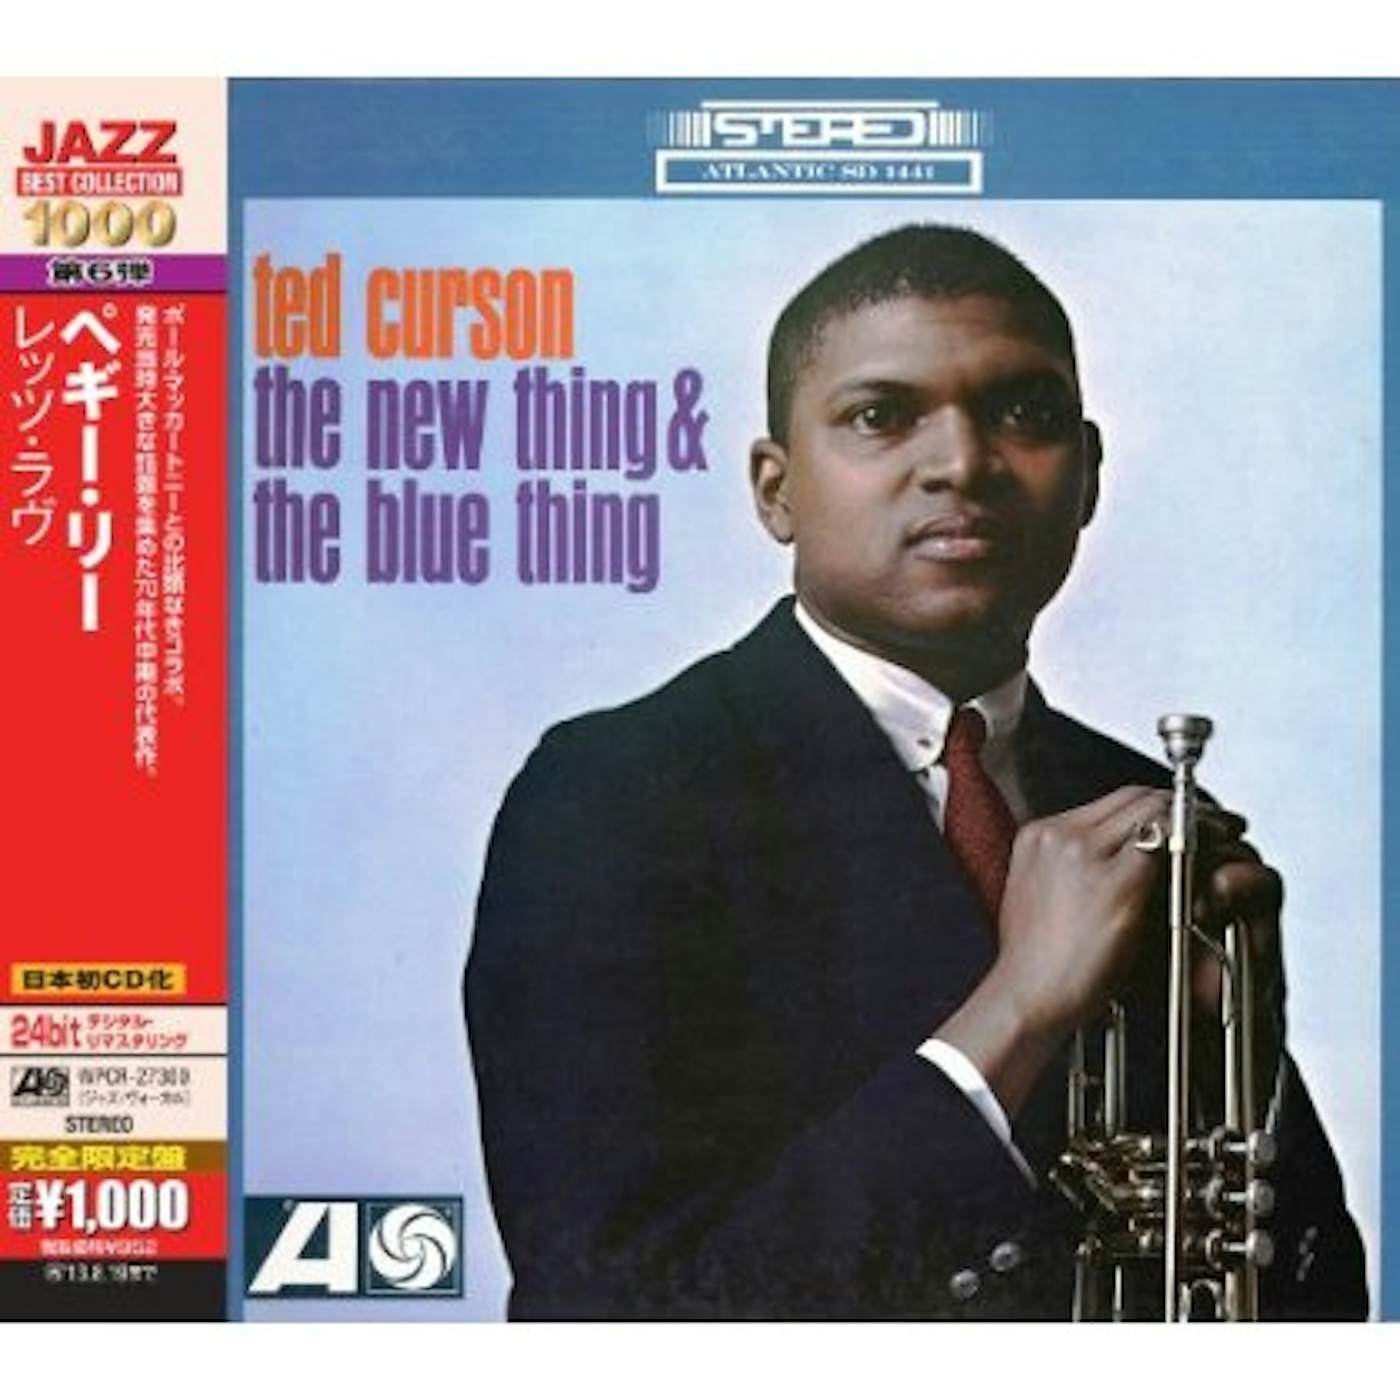 Ted Curson NEW THING & THE BLUE THING CD